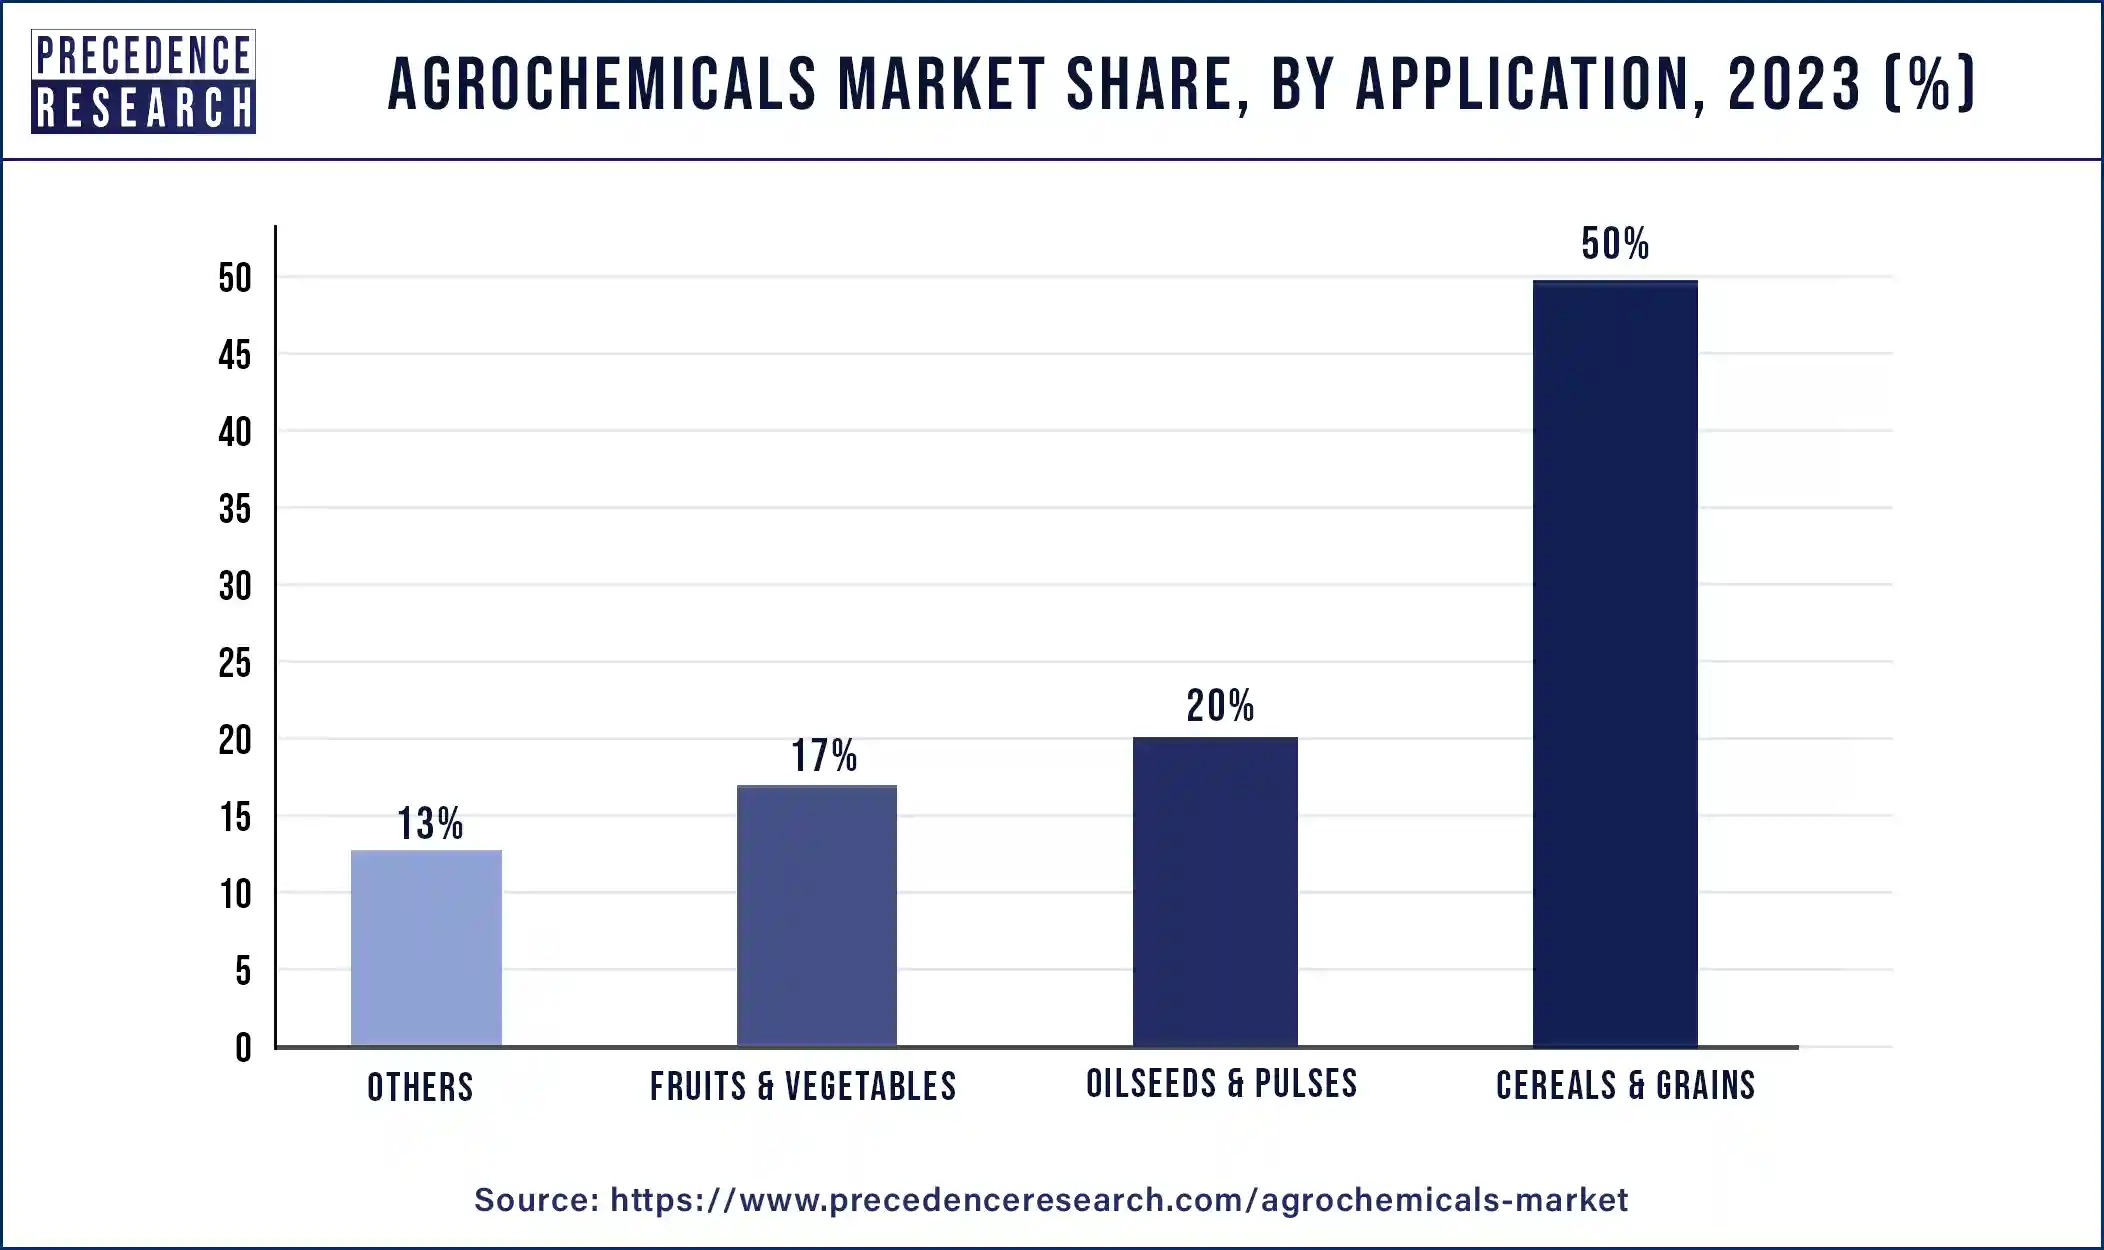 Agrochemicals Market Share, By Application, 2023 (%)